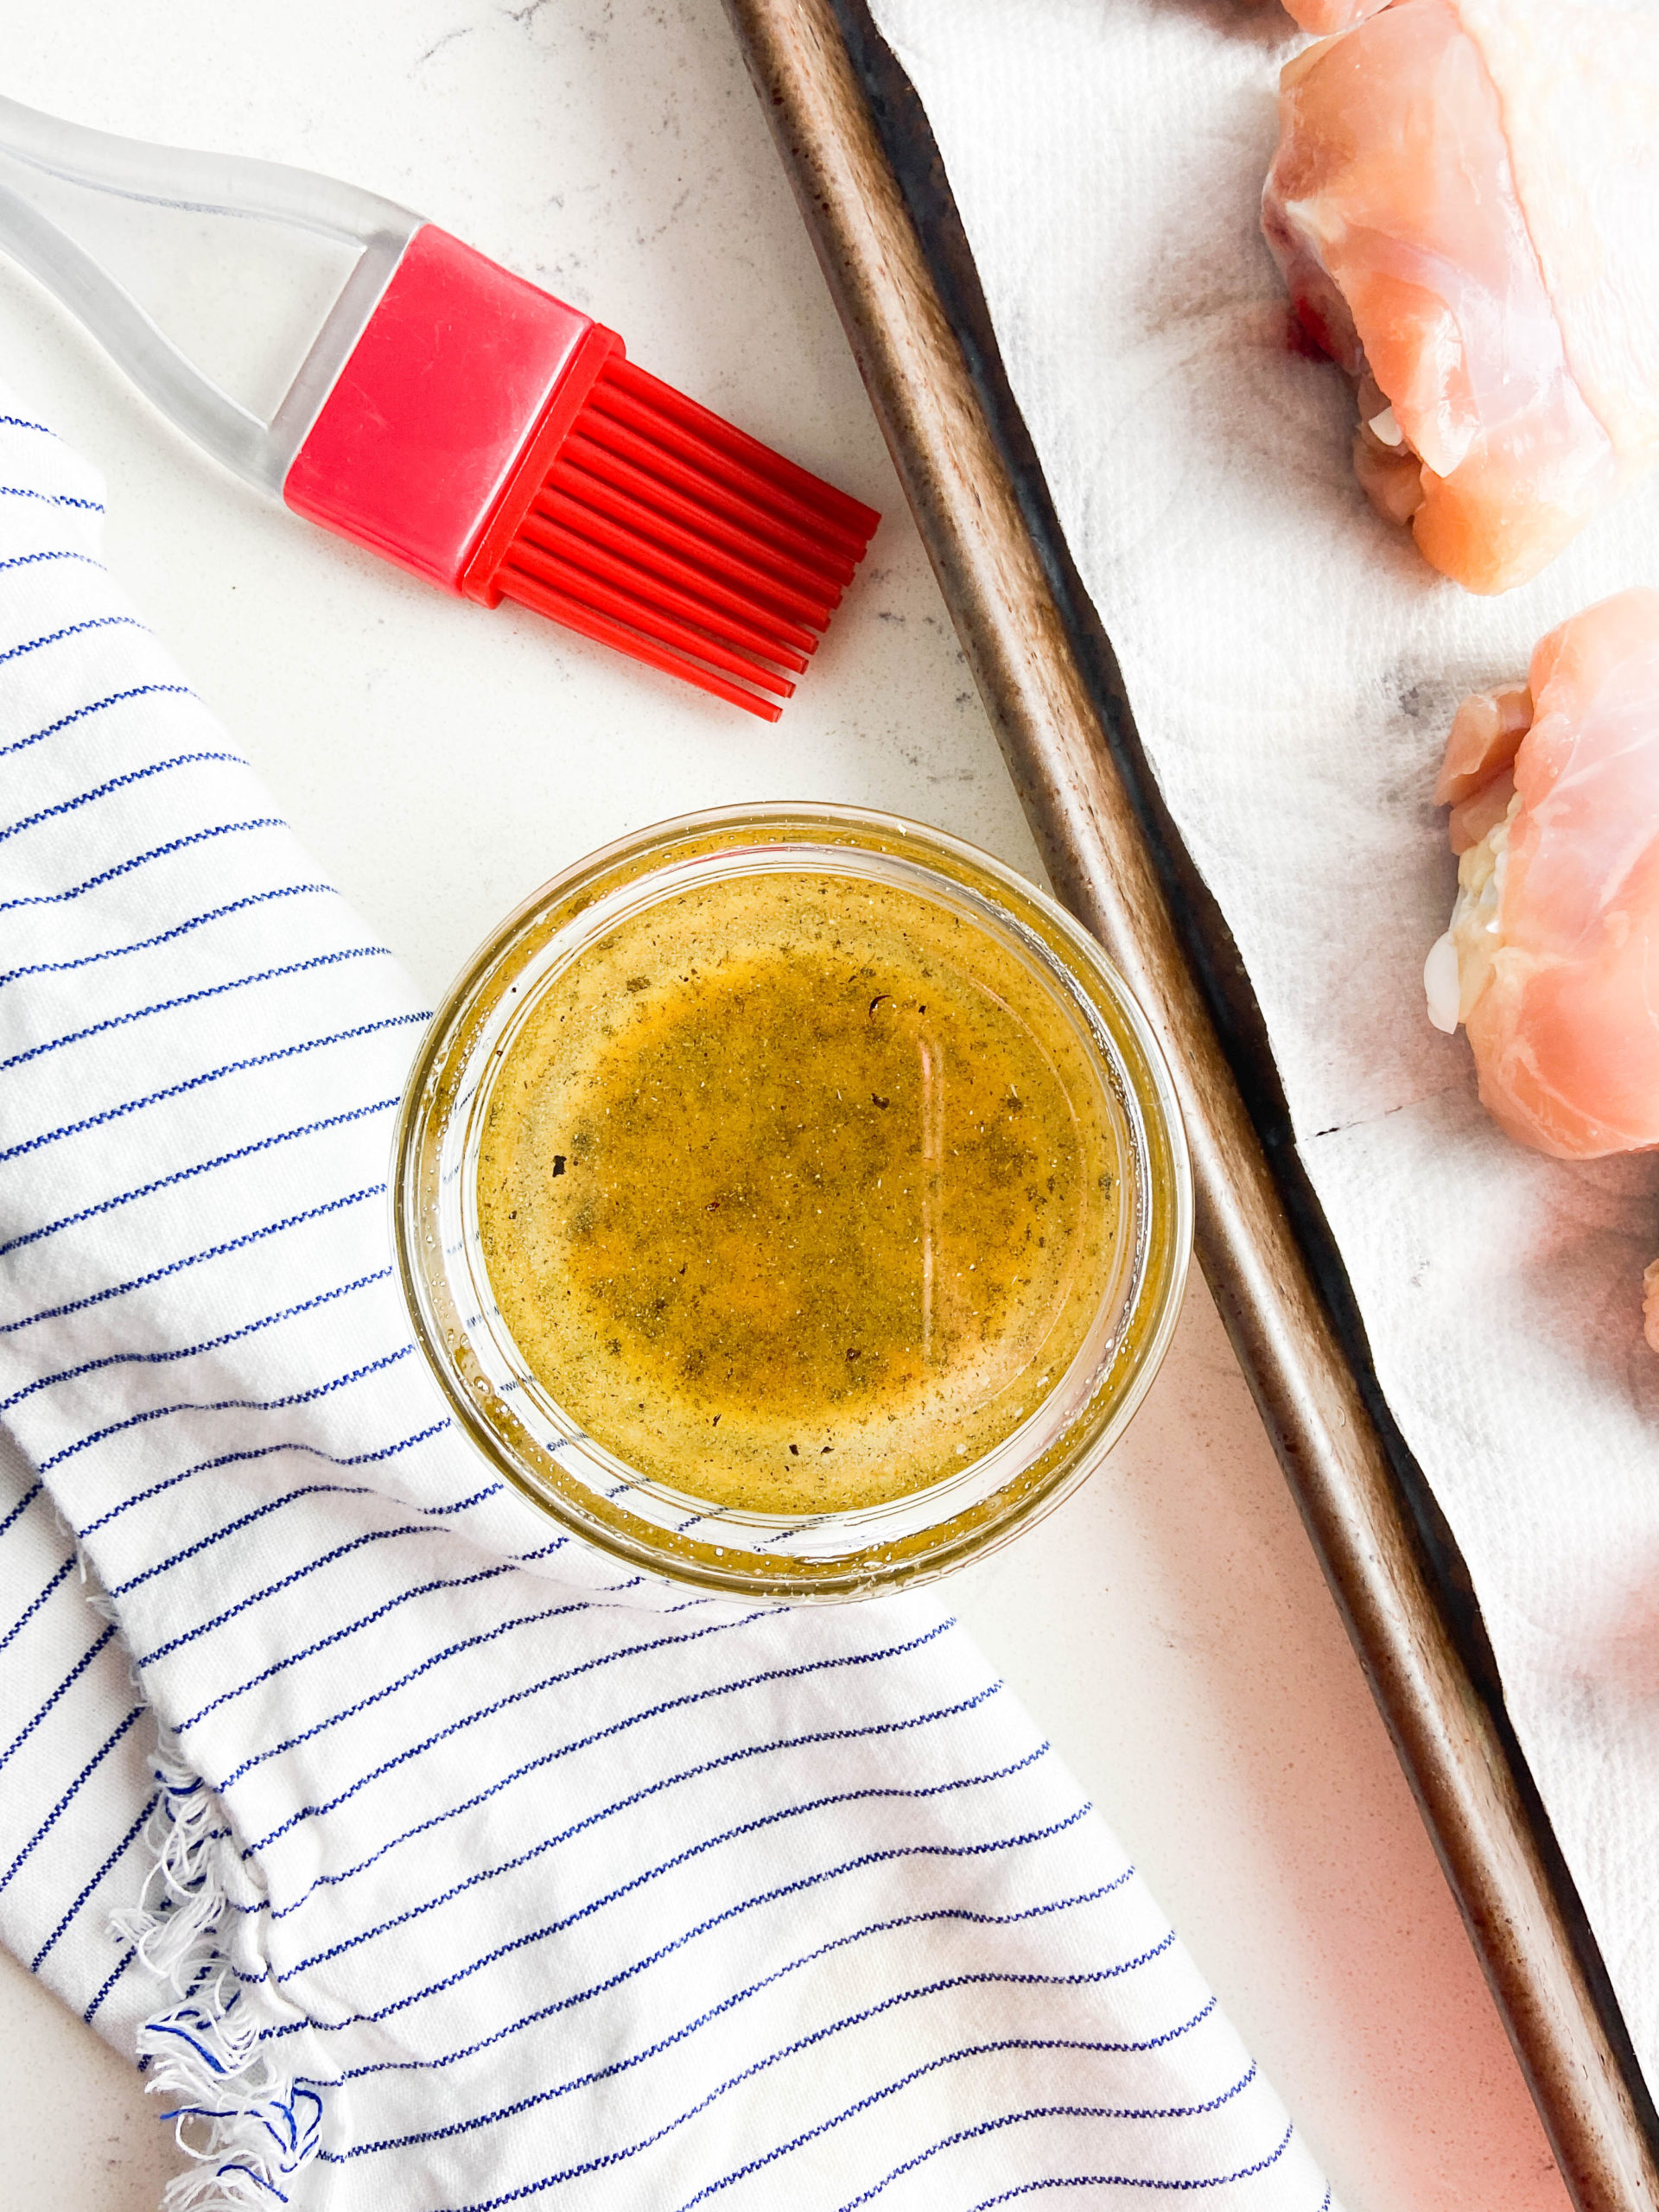 Garlic pepper oil in a clear glass bowl next to a striped towel on a white background. Chicken and pastry brush off to the side. 